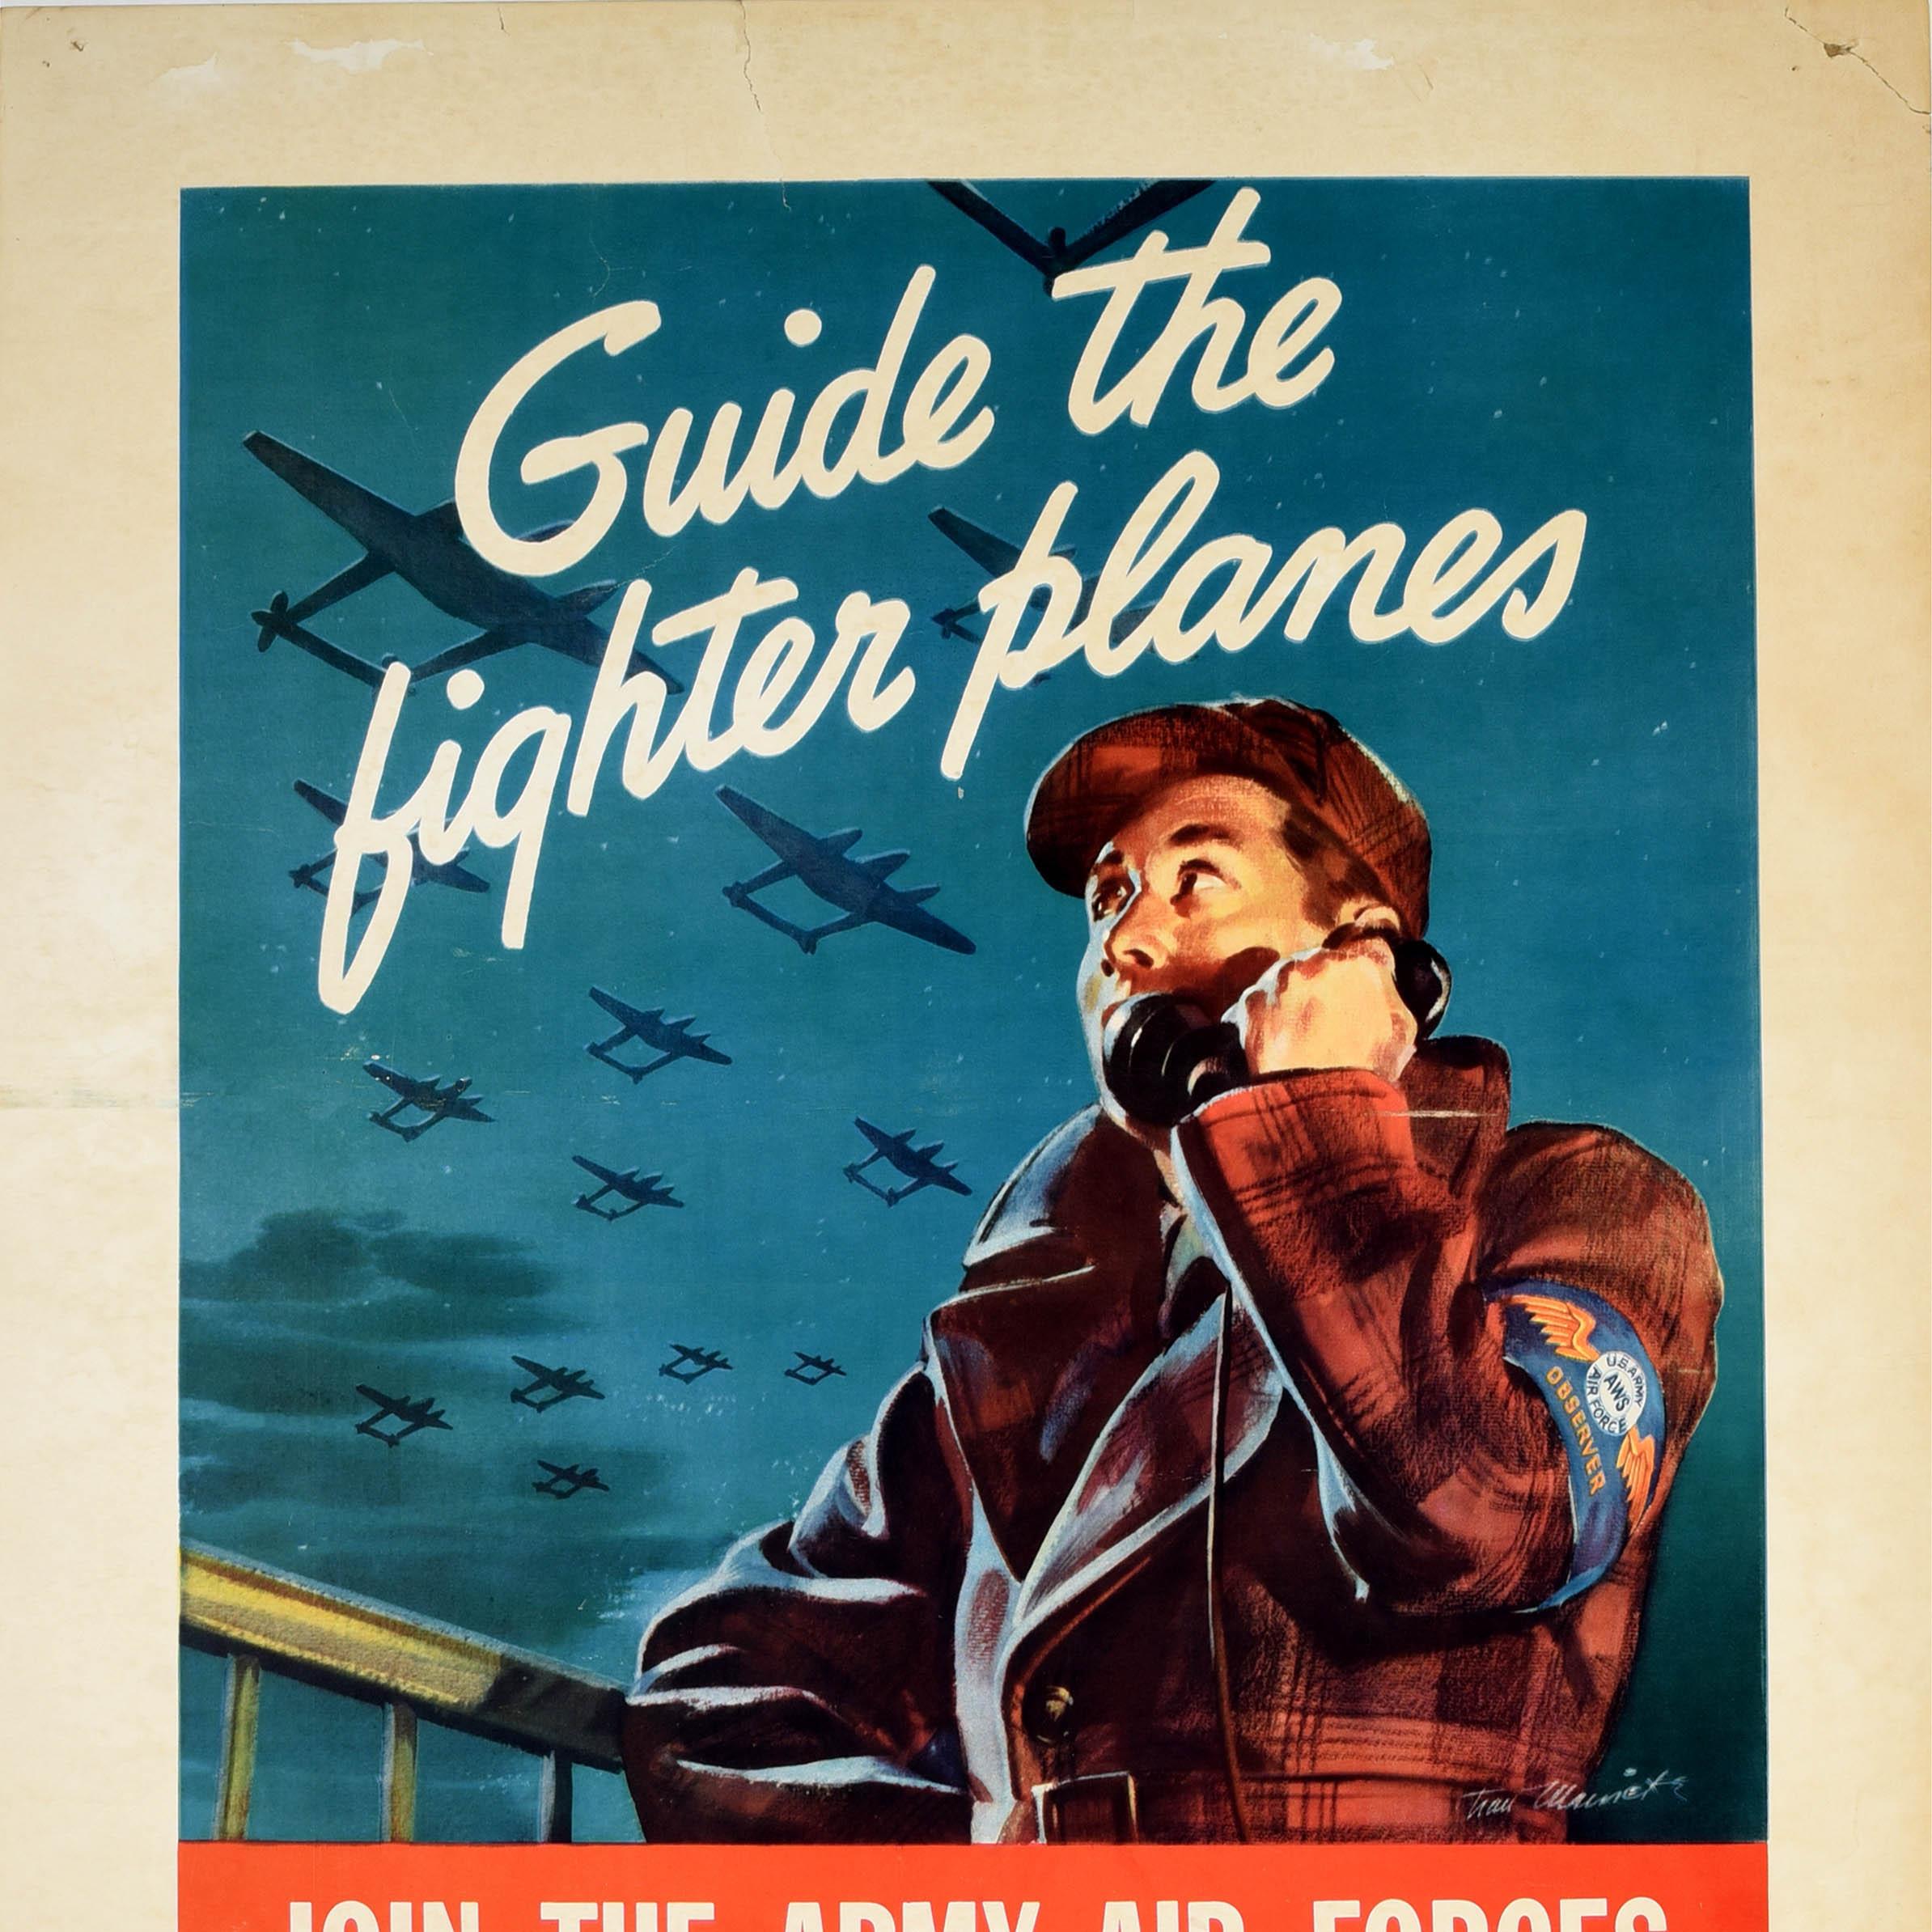 Original Vintage WWII Poster Guide The Fighter Planes Army Air Force Recruitment, Vintage, WWII (amerikanisch) im Angebot